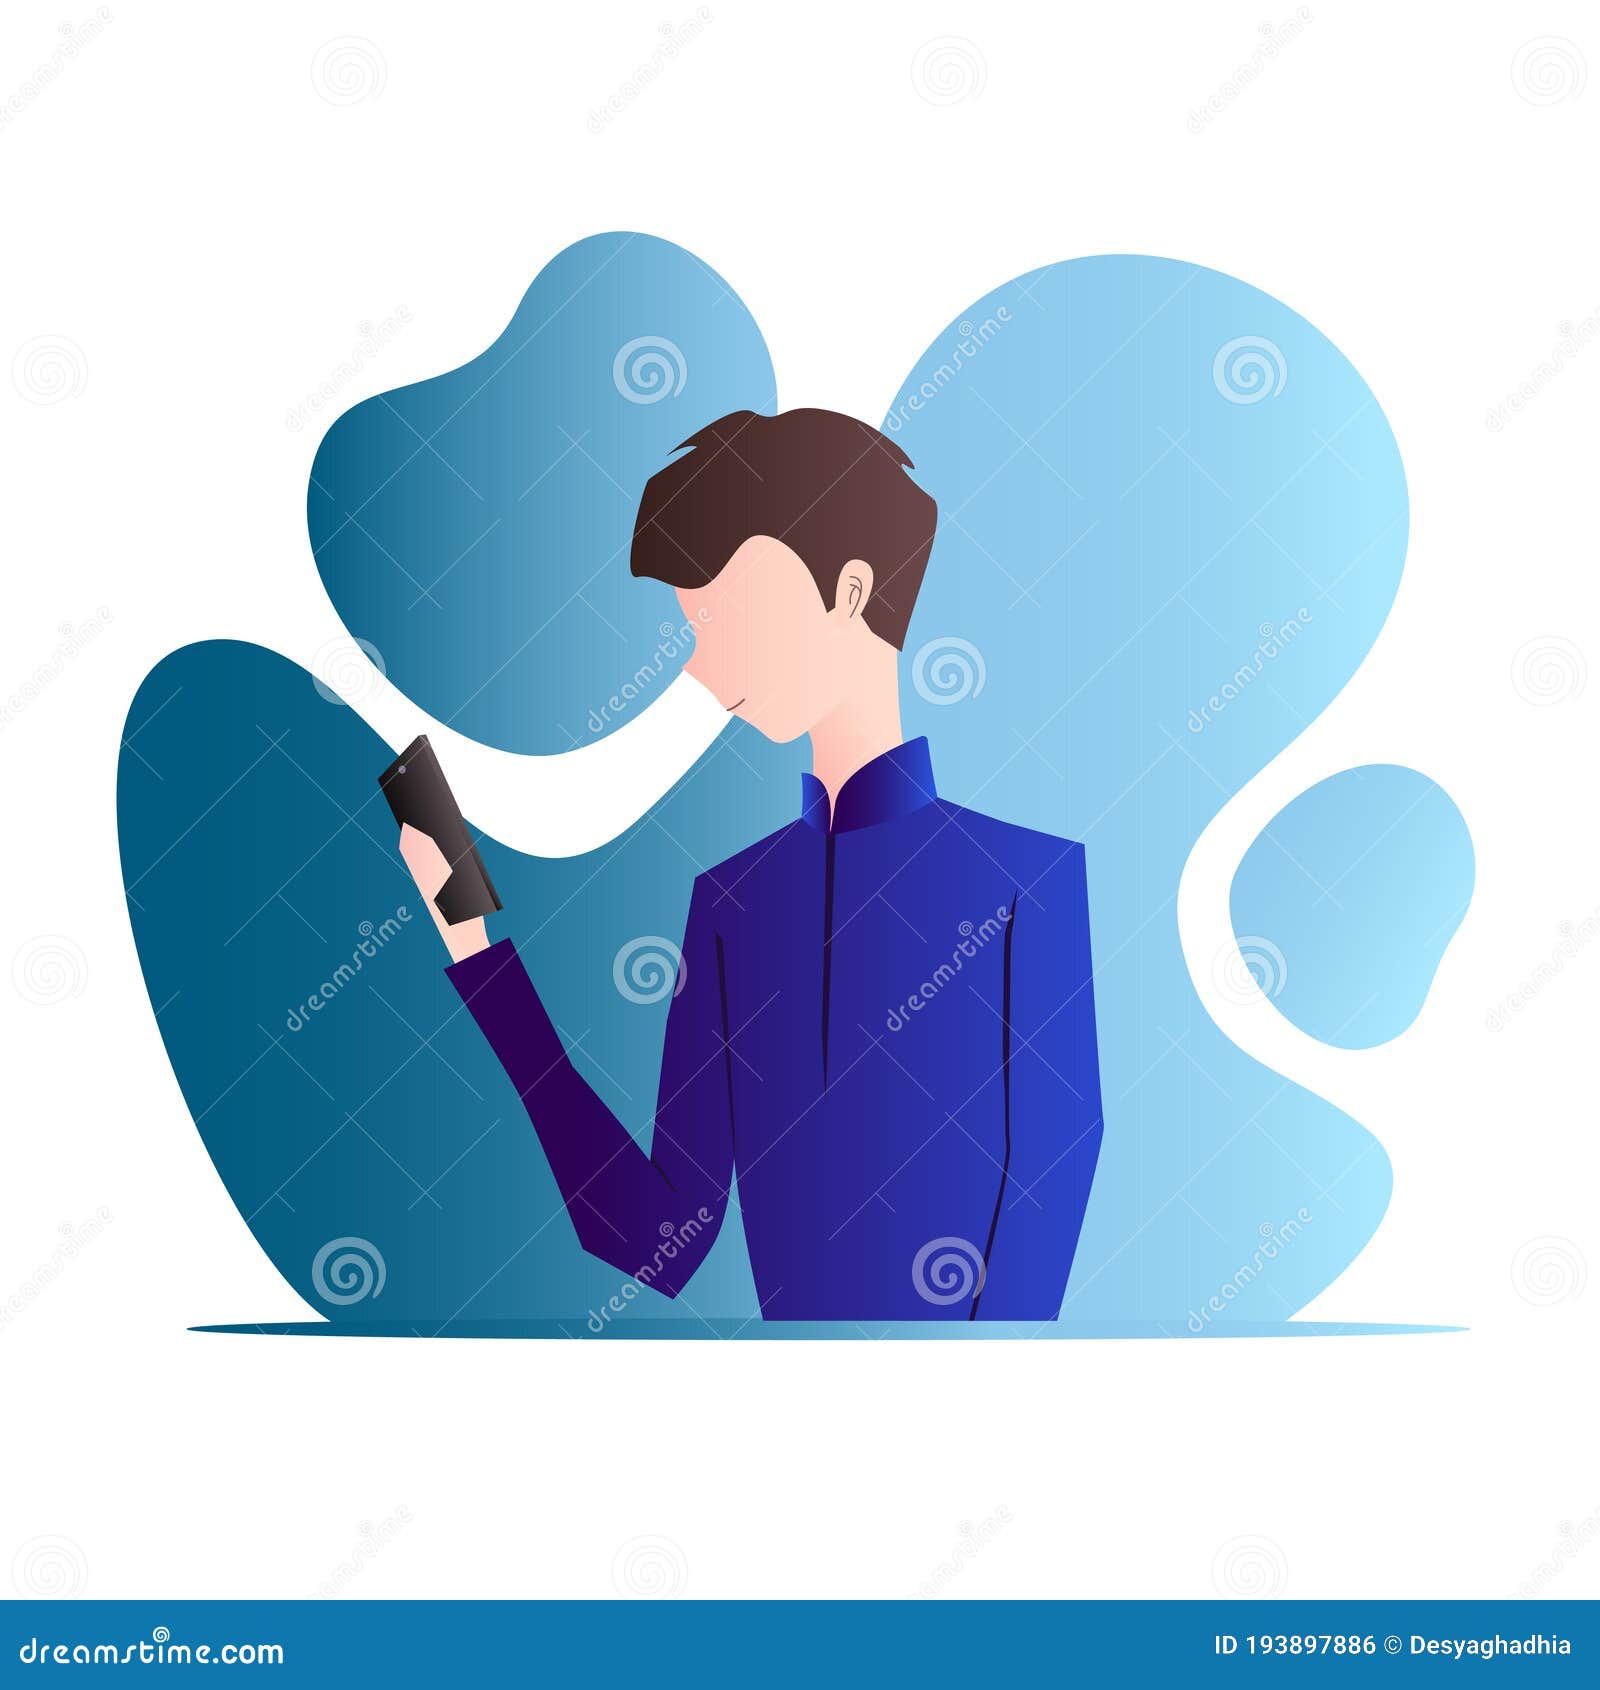 Young Man Holding a Smartphone, Texting and Making Calls. Cartoon Character  Illustration with His Gadget. Stock Vector - Illustration of cellphone,  device: 193897886